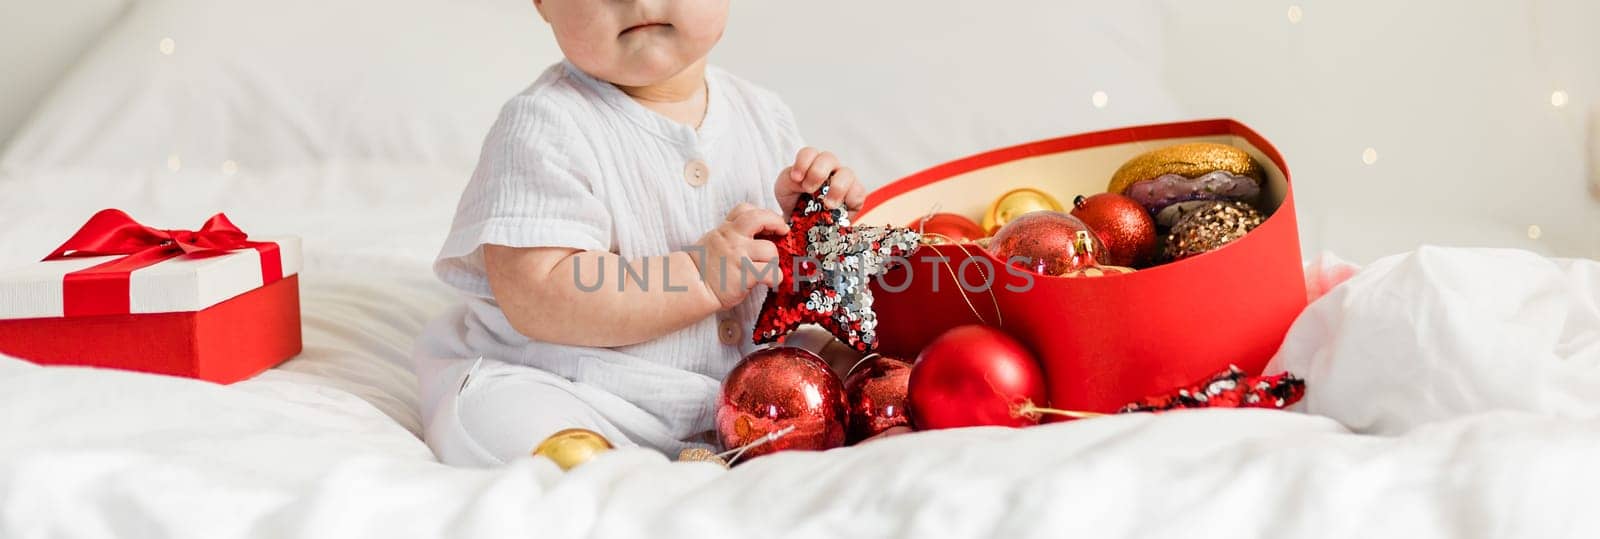 Christmas Baby in Santa Hat, Child holding christmas bauble near Present Gift Box over Holiday Lights